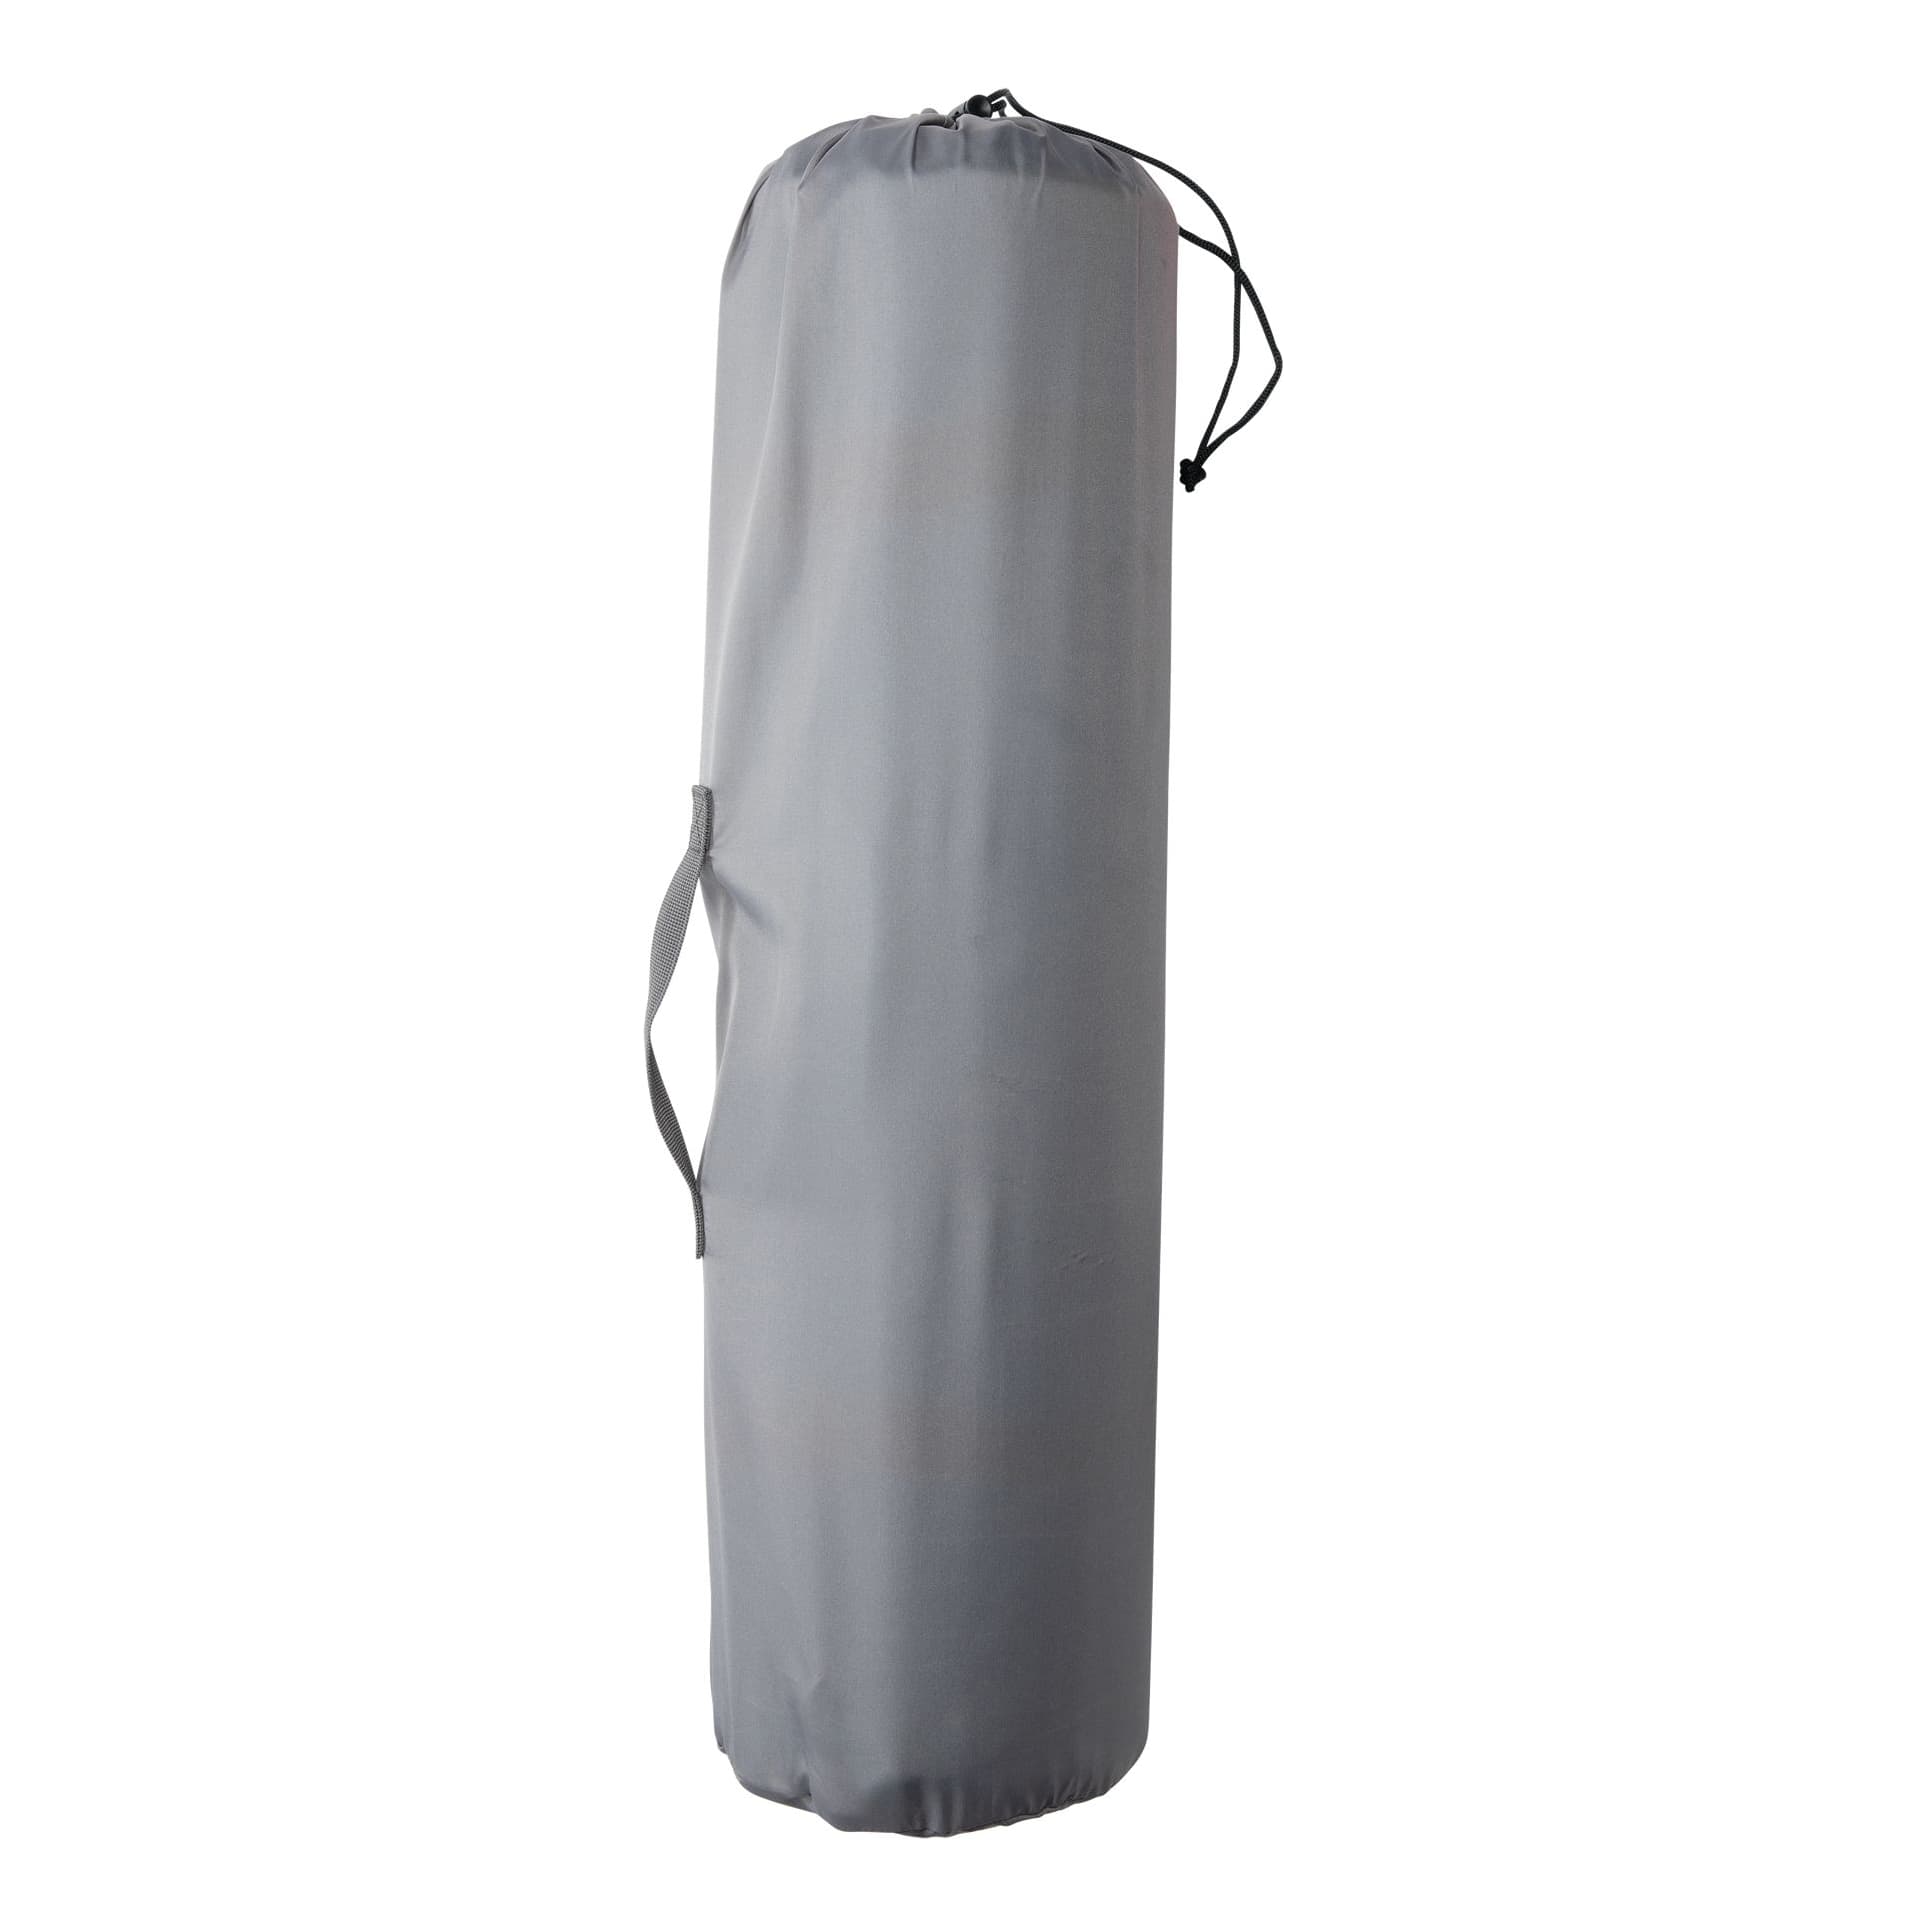 Ascend Snooze Fest Self-Inflating Sleeping Pad - Stuff Sack View